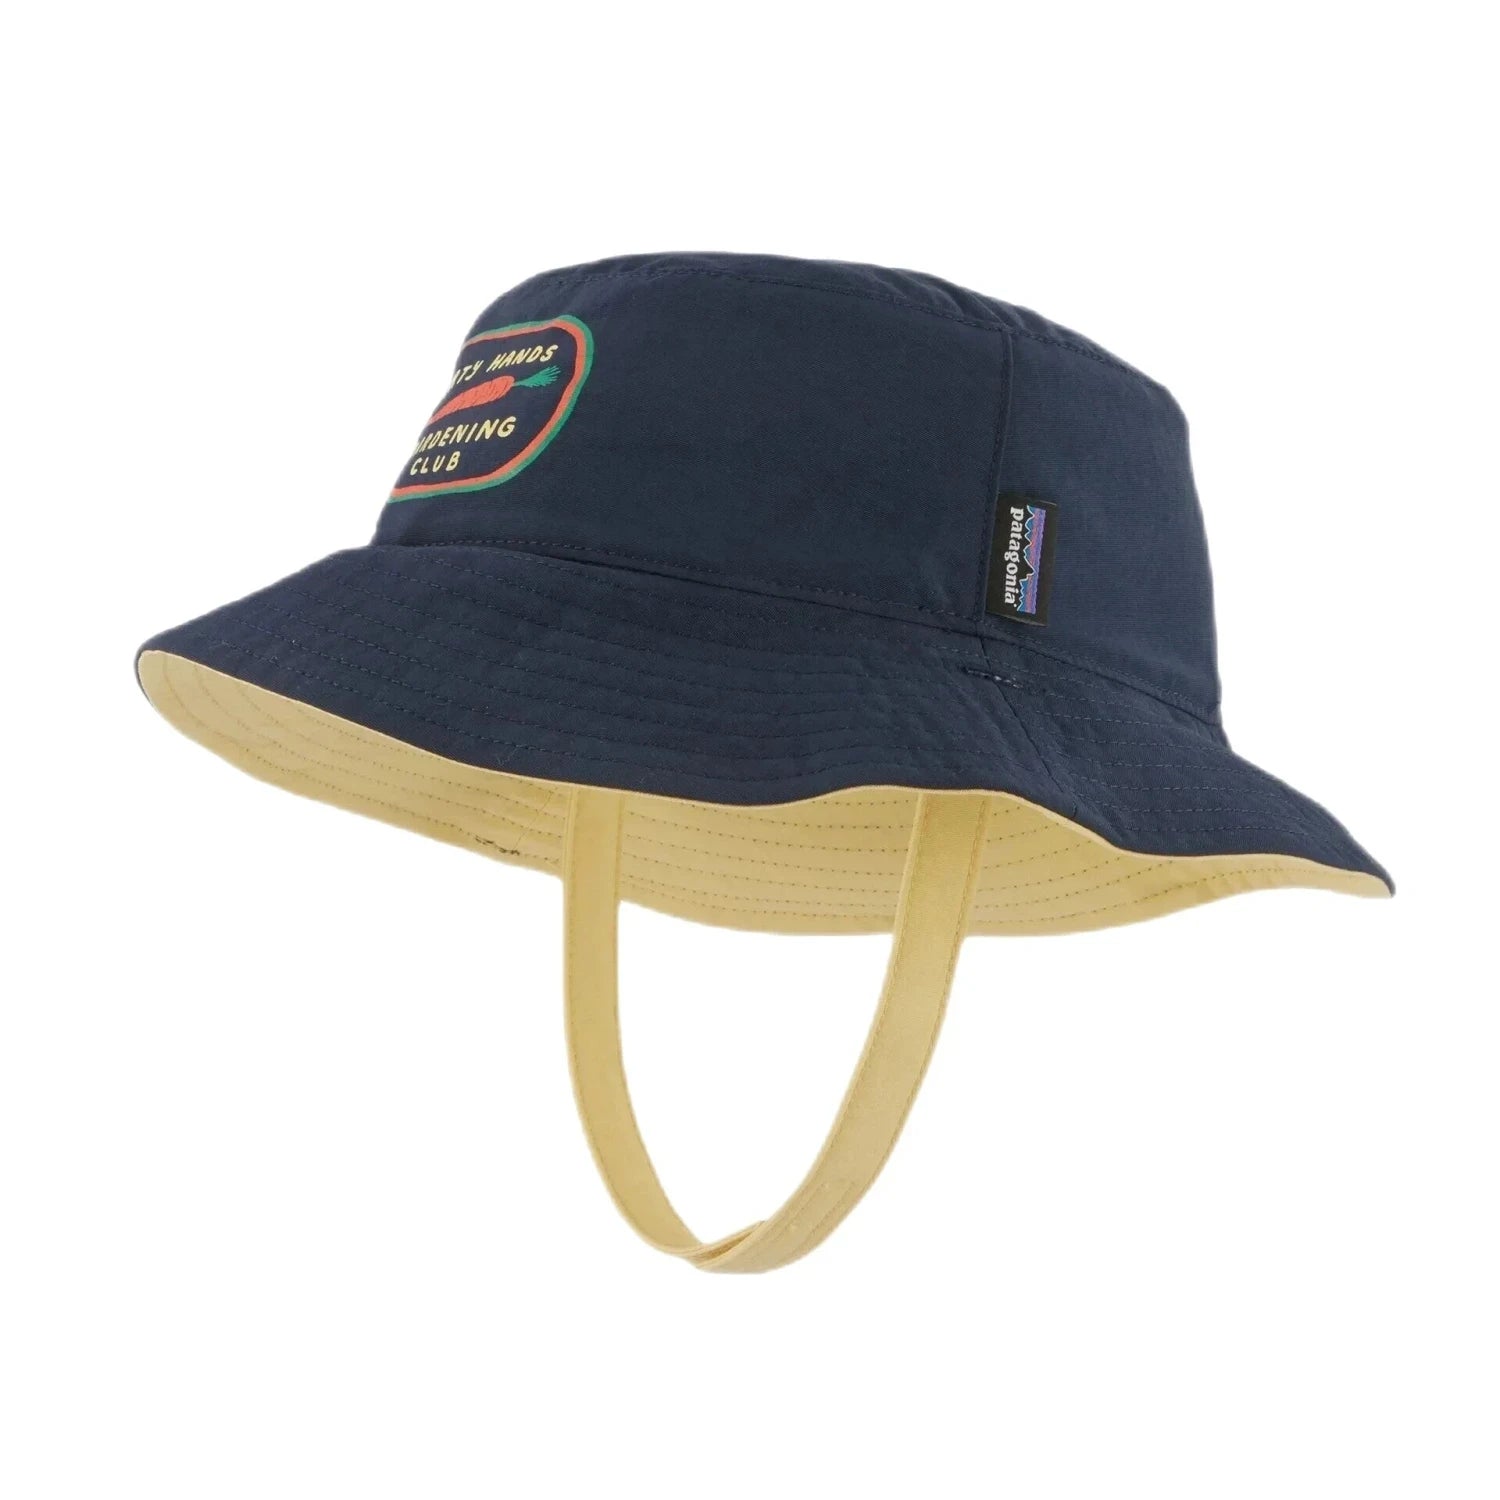 Patagonia Baby Sun Bucket Hat, Garden Club New Navy, front and side view